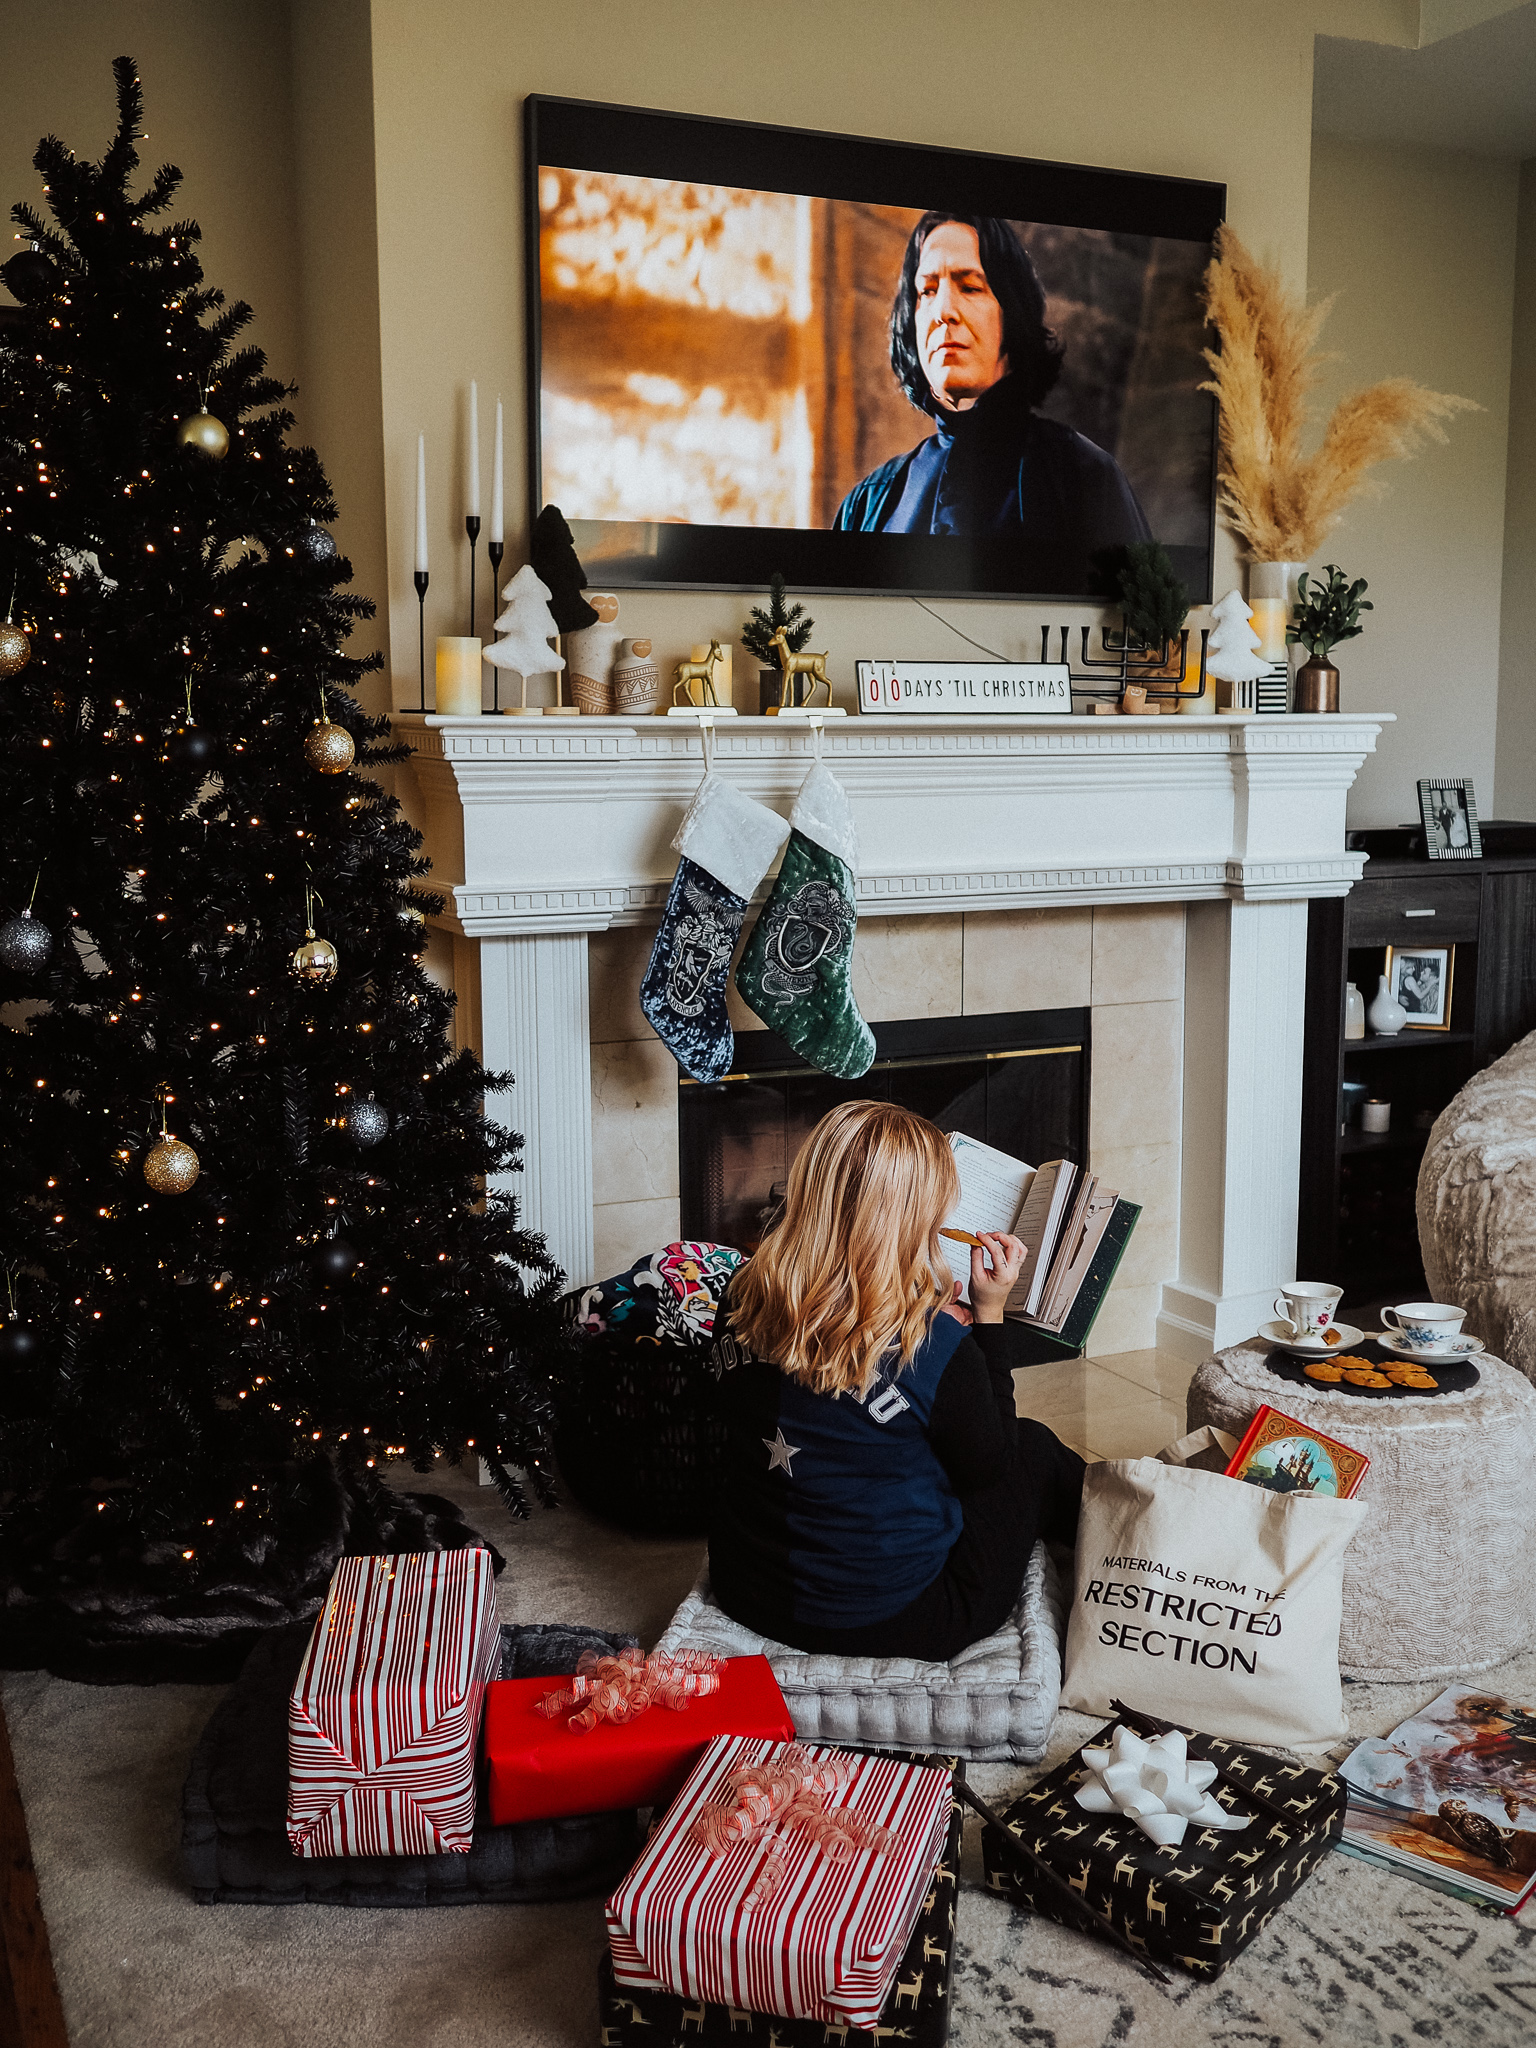 Get into the Hogwarts Christmas spirit with this guide on how to have a very merry Harry Potter Christmas at home.